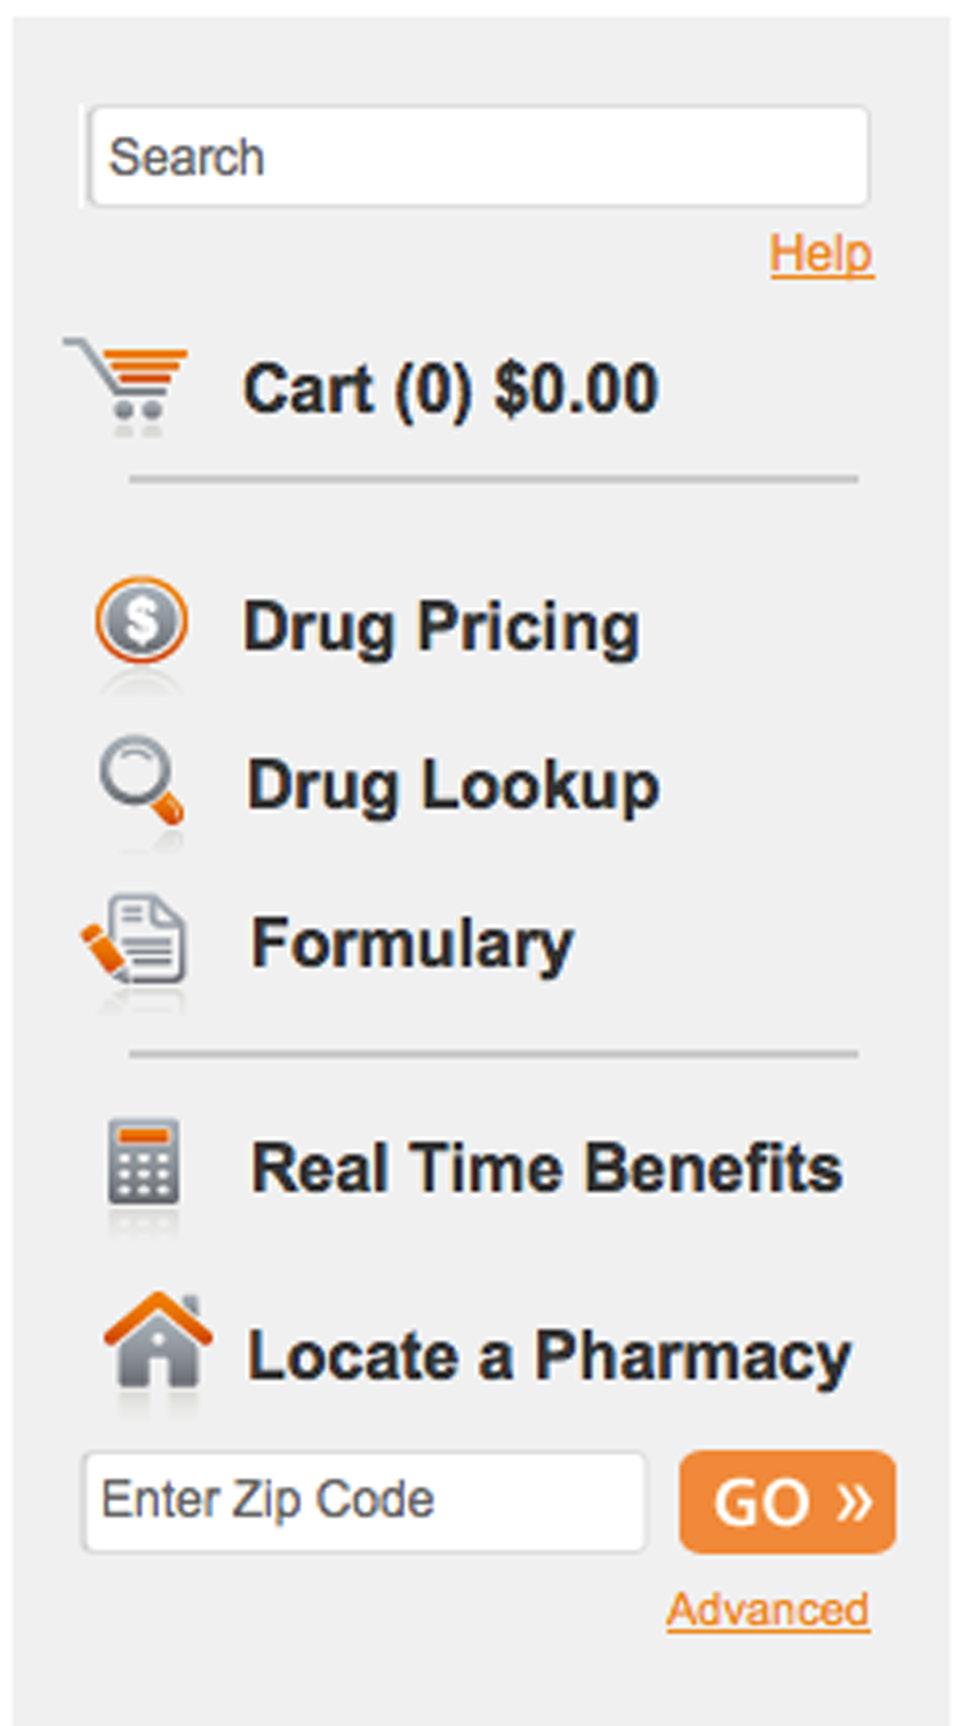 Quick Links The Quick Links box provides access to a variety of benefits and tools such as: Drug Pricing Search prices for medications and find their lower-cost alternatives.